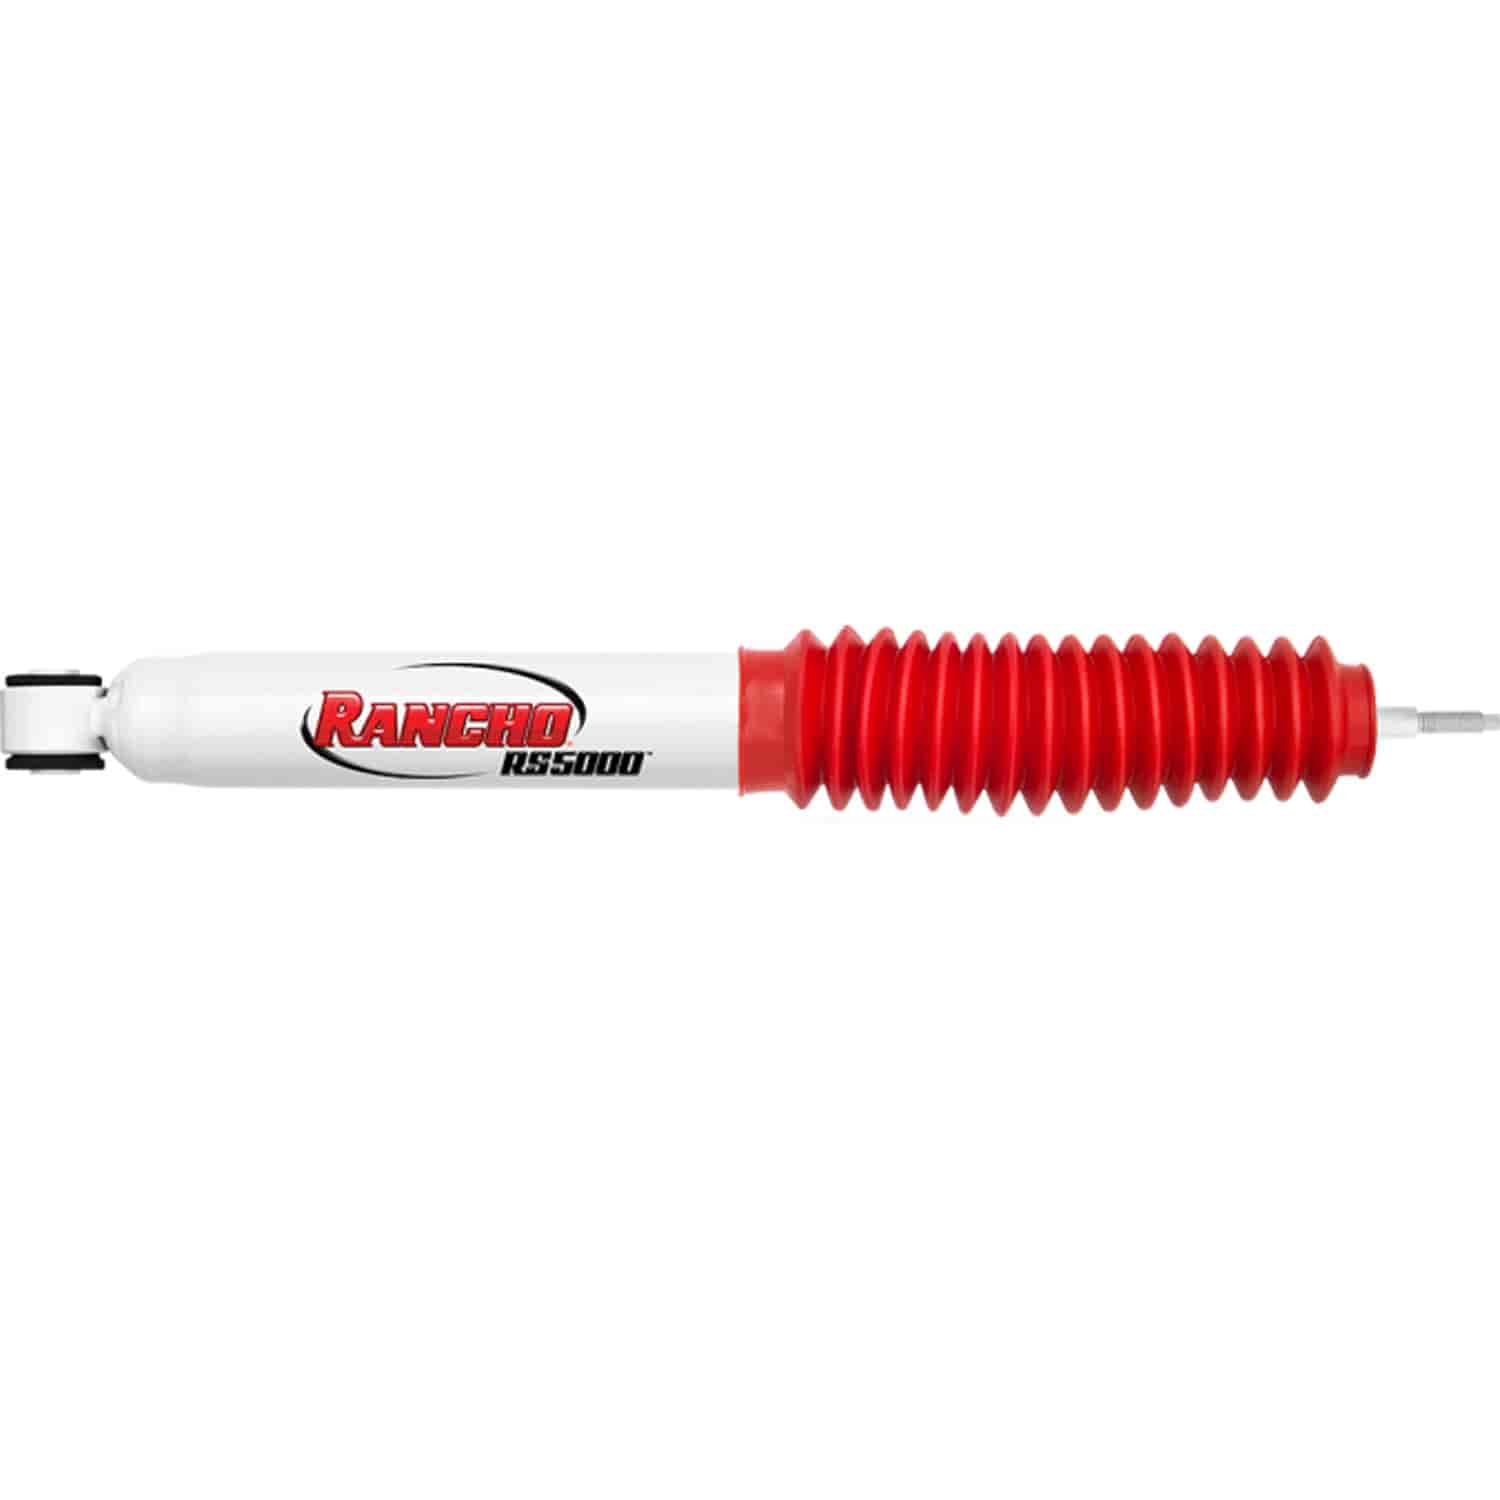 RS5000 Rear Shock Absorber Fits Toyota Land Cruiser